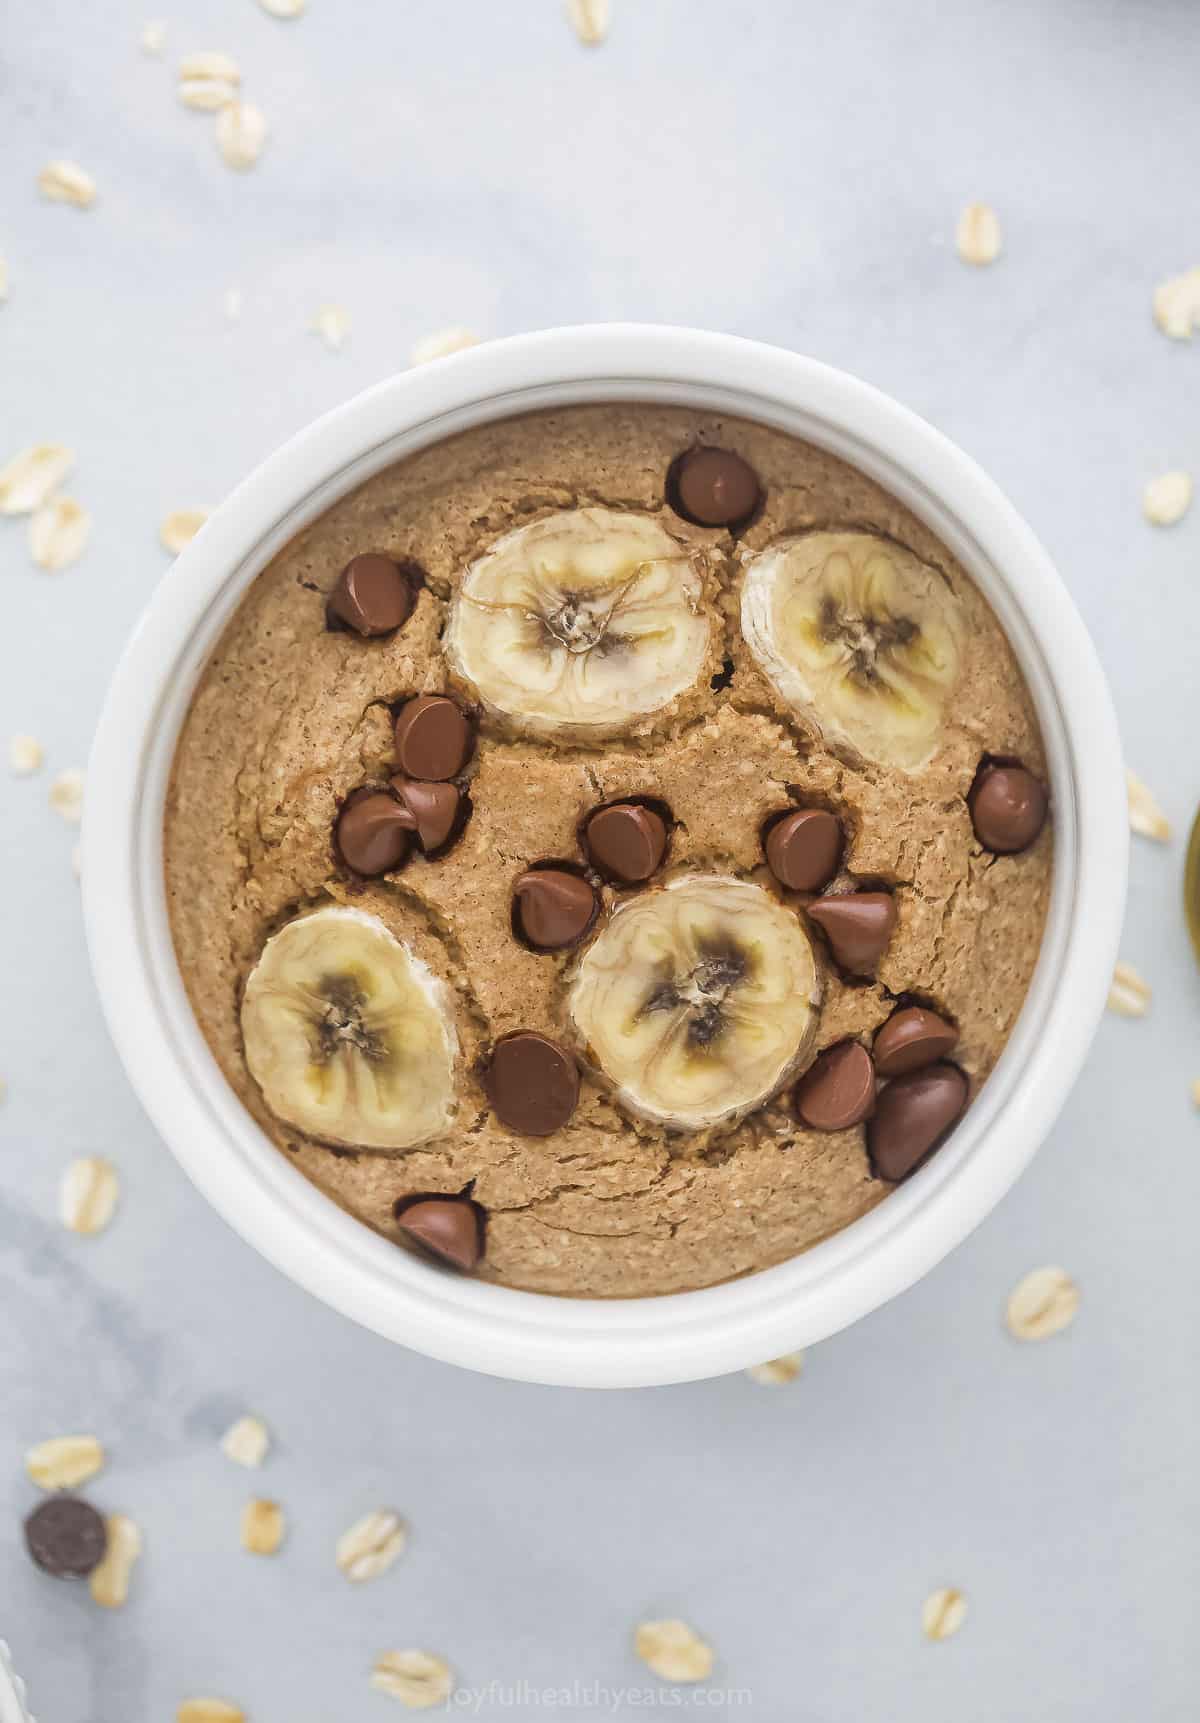 A ramekin full of baked oatmeal with chocolate chips and banana slices on top